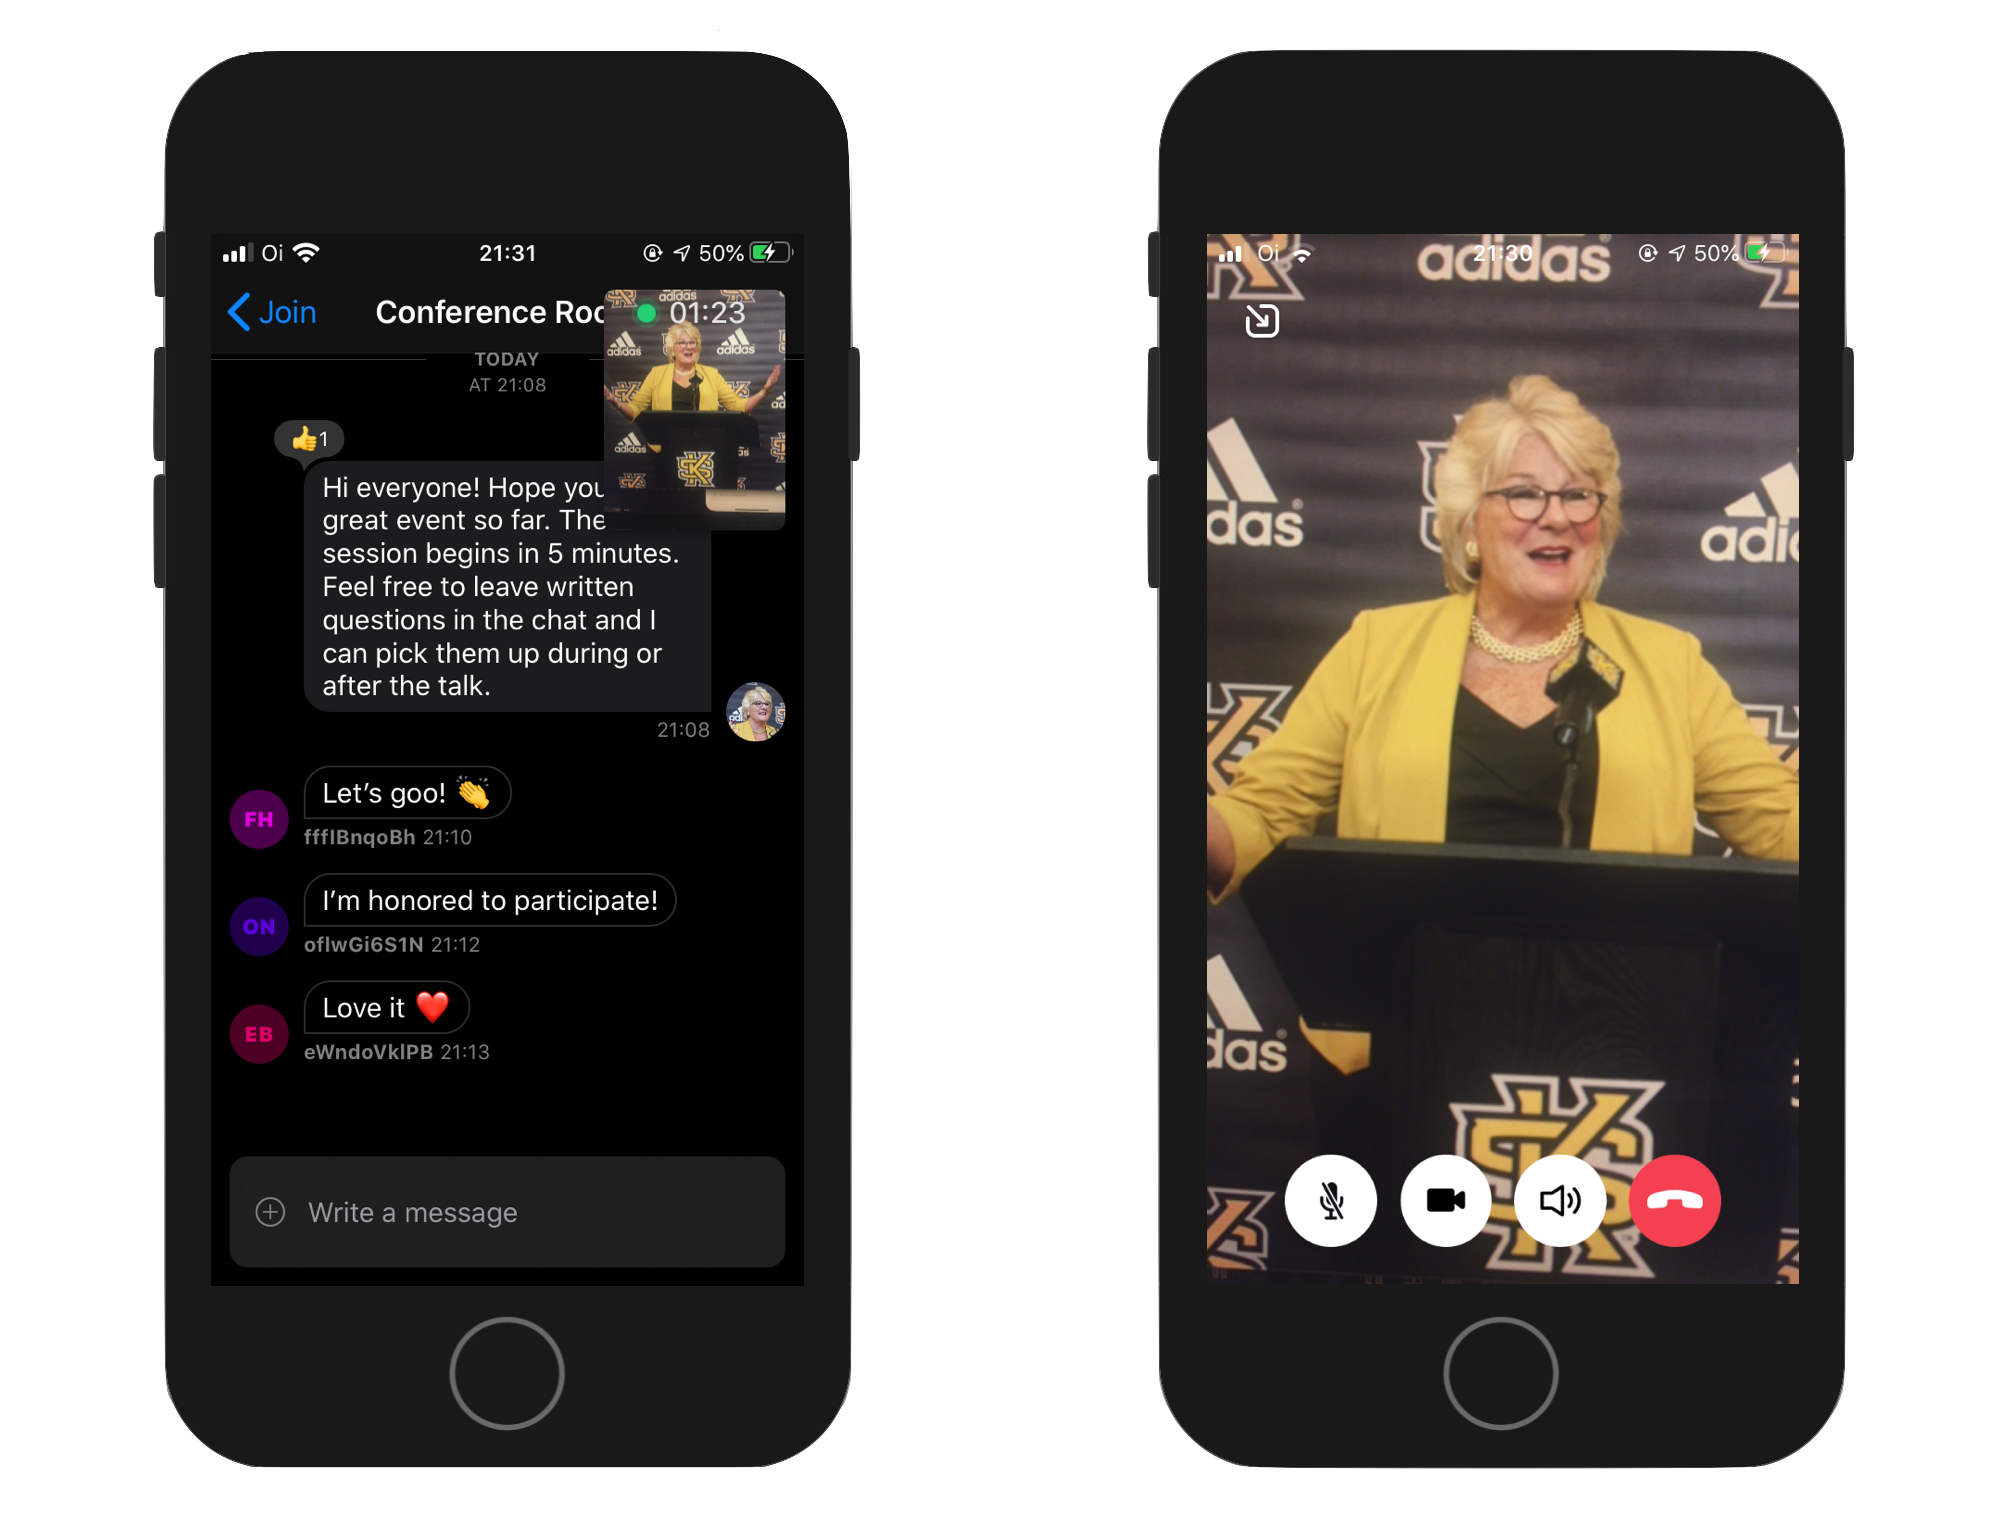 Image shows two screenshots of the completed event app, one from the chat screen with a small video overlay with the speaker, and another with a fullscreen livestream video of the speaker